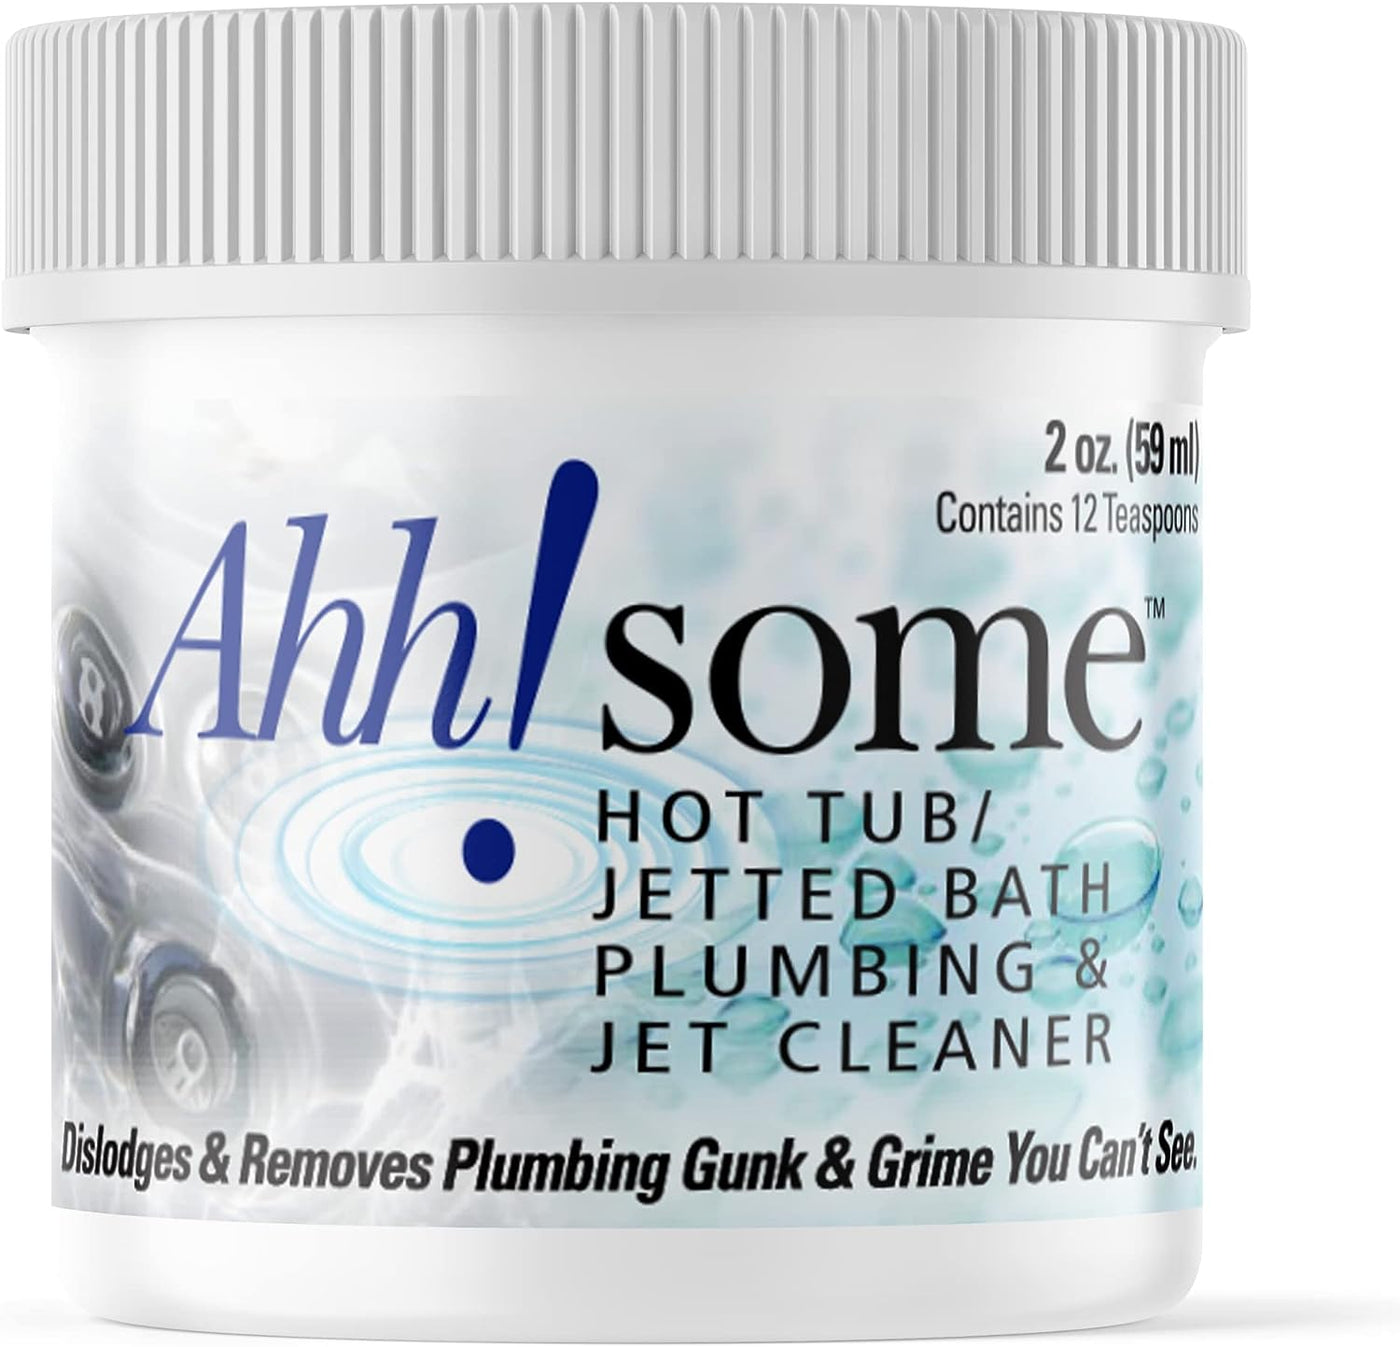 Ahh! Some Hot Tub/Jetted Bath Plumbing & Jet Cleaner (2 oz.)